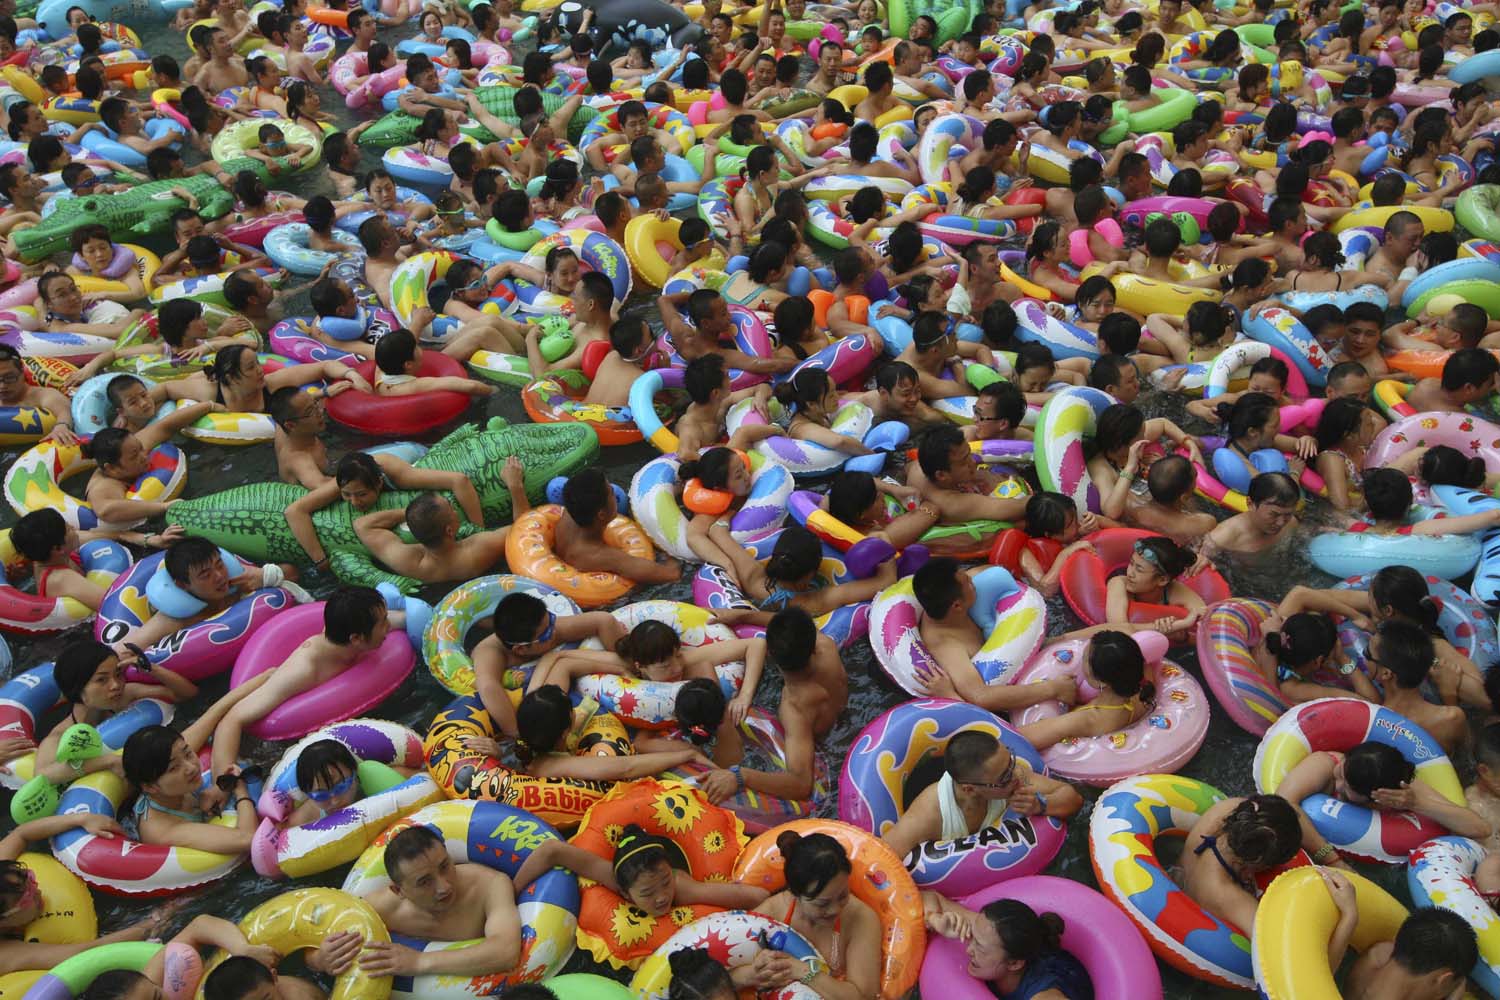 July 27, 2013. Visitors crowd an artificial wave pool at a tourist resort to escape the summer heat in Daying county of Suining, Sichuan province.